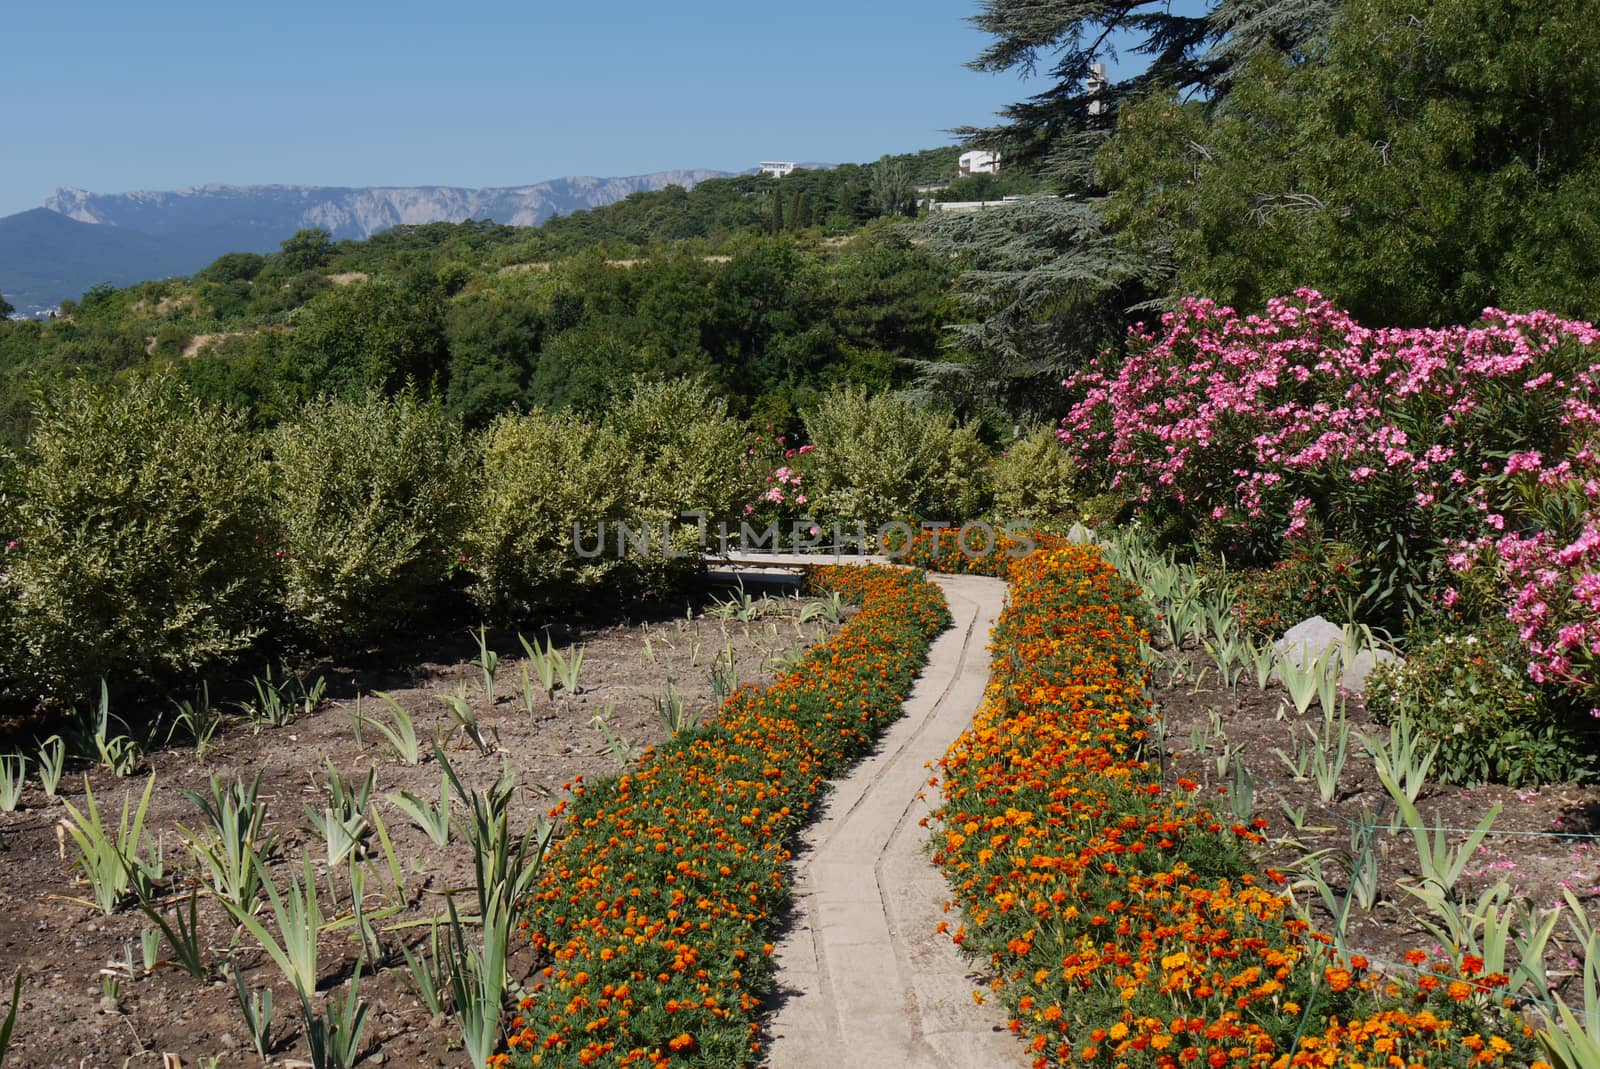 A narrow path between flowerbeds with orange marigolds and other flowers